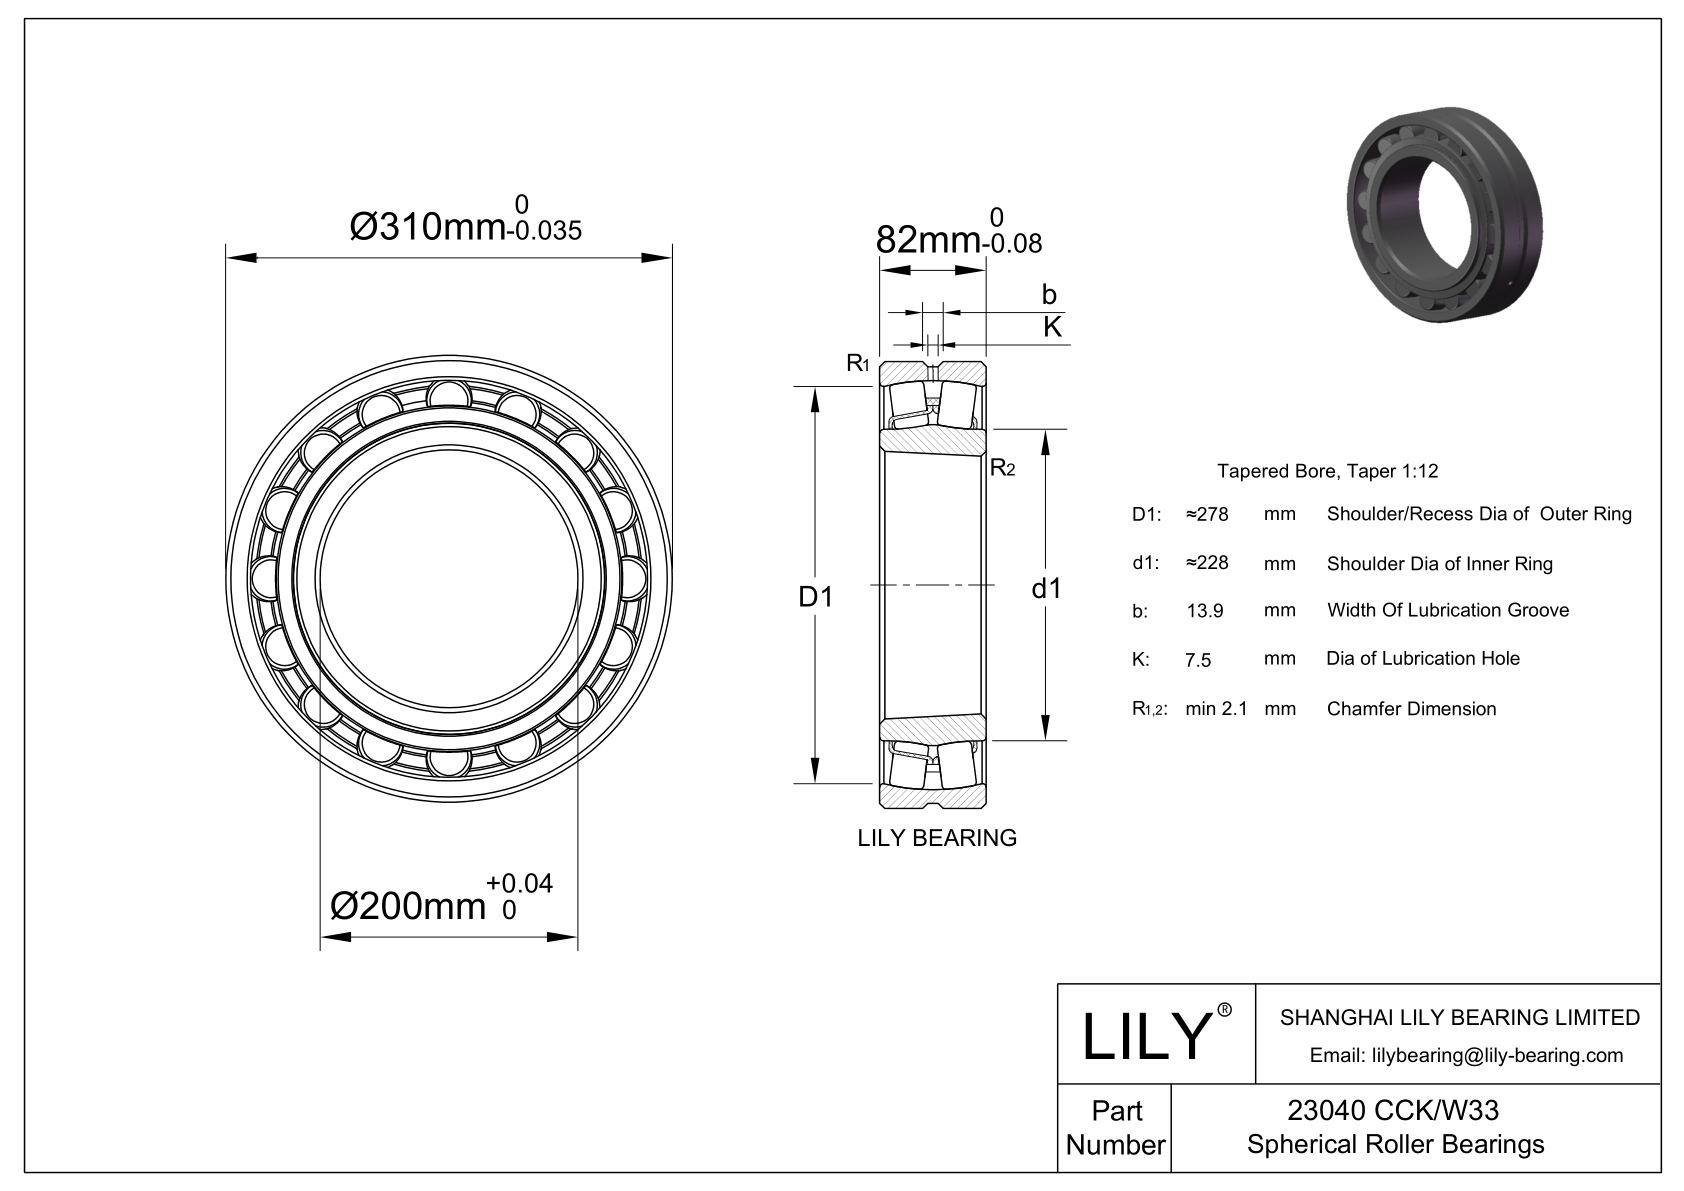 23040 CCK/W33 Double Row Spherical Roller Bearing cad drawing